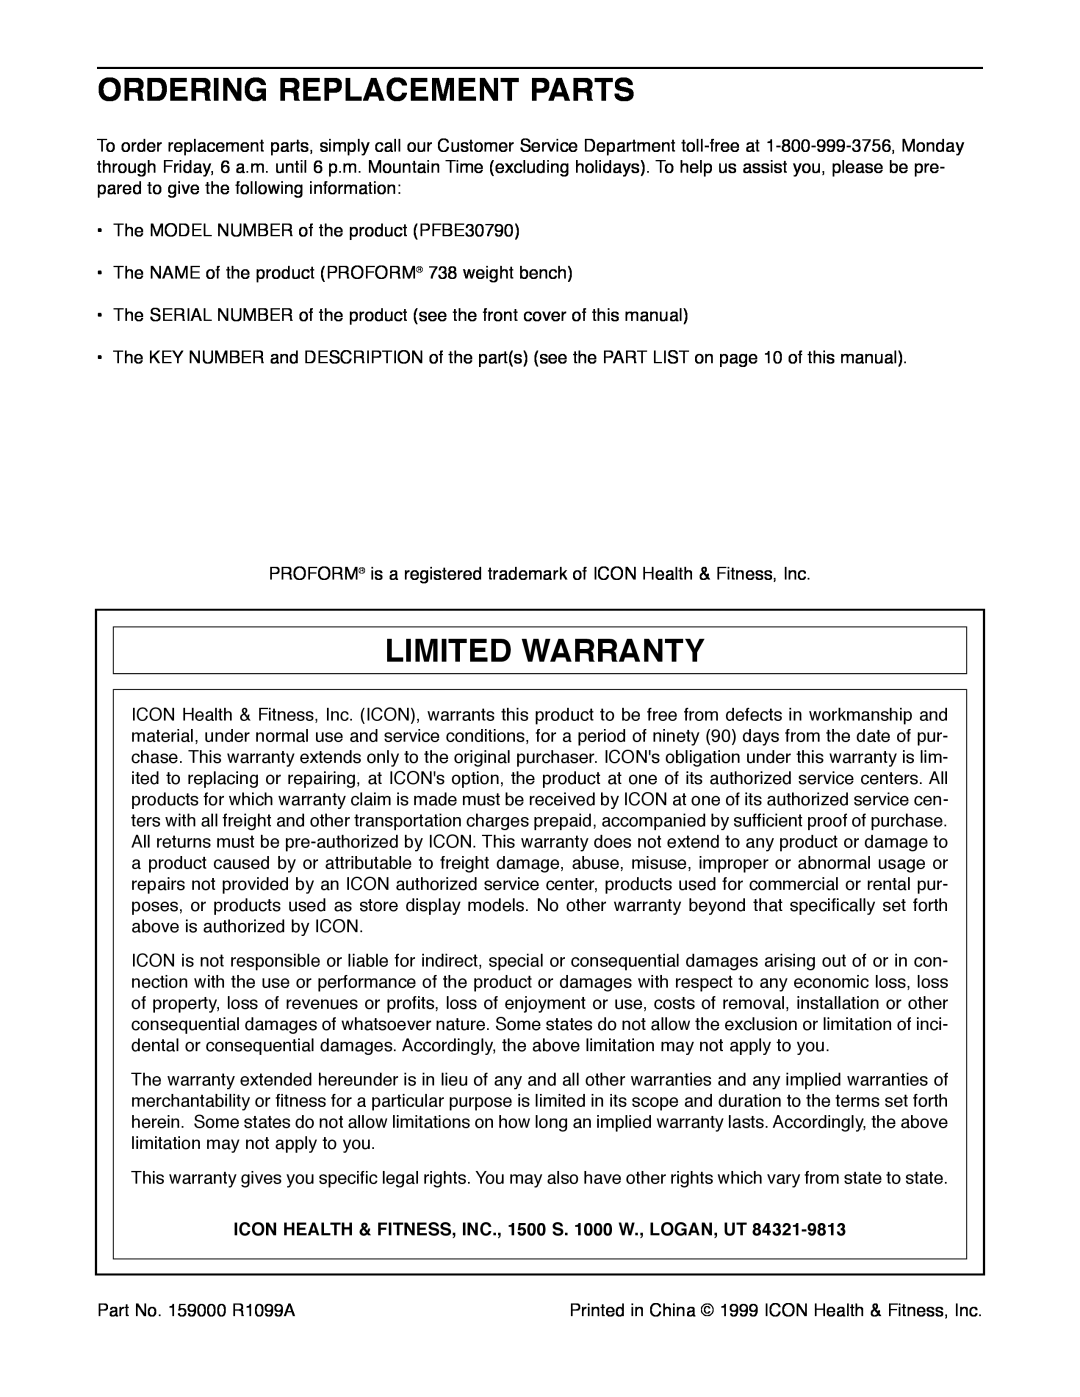 ProForm PFBE30790 Ordering Replacement Parts, Limited Warranty, ICON HEALTH & FITNESS, INC., 1500 S. 1000 W., LOGAN, UT 